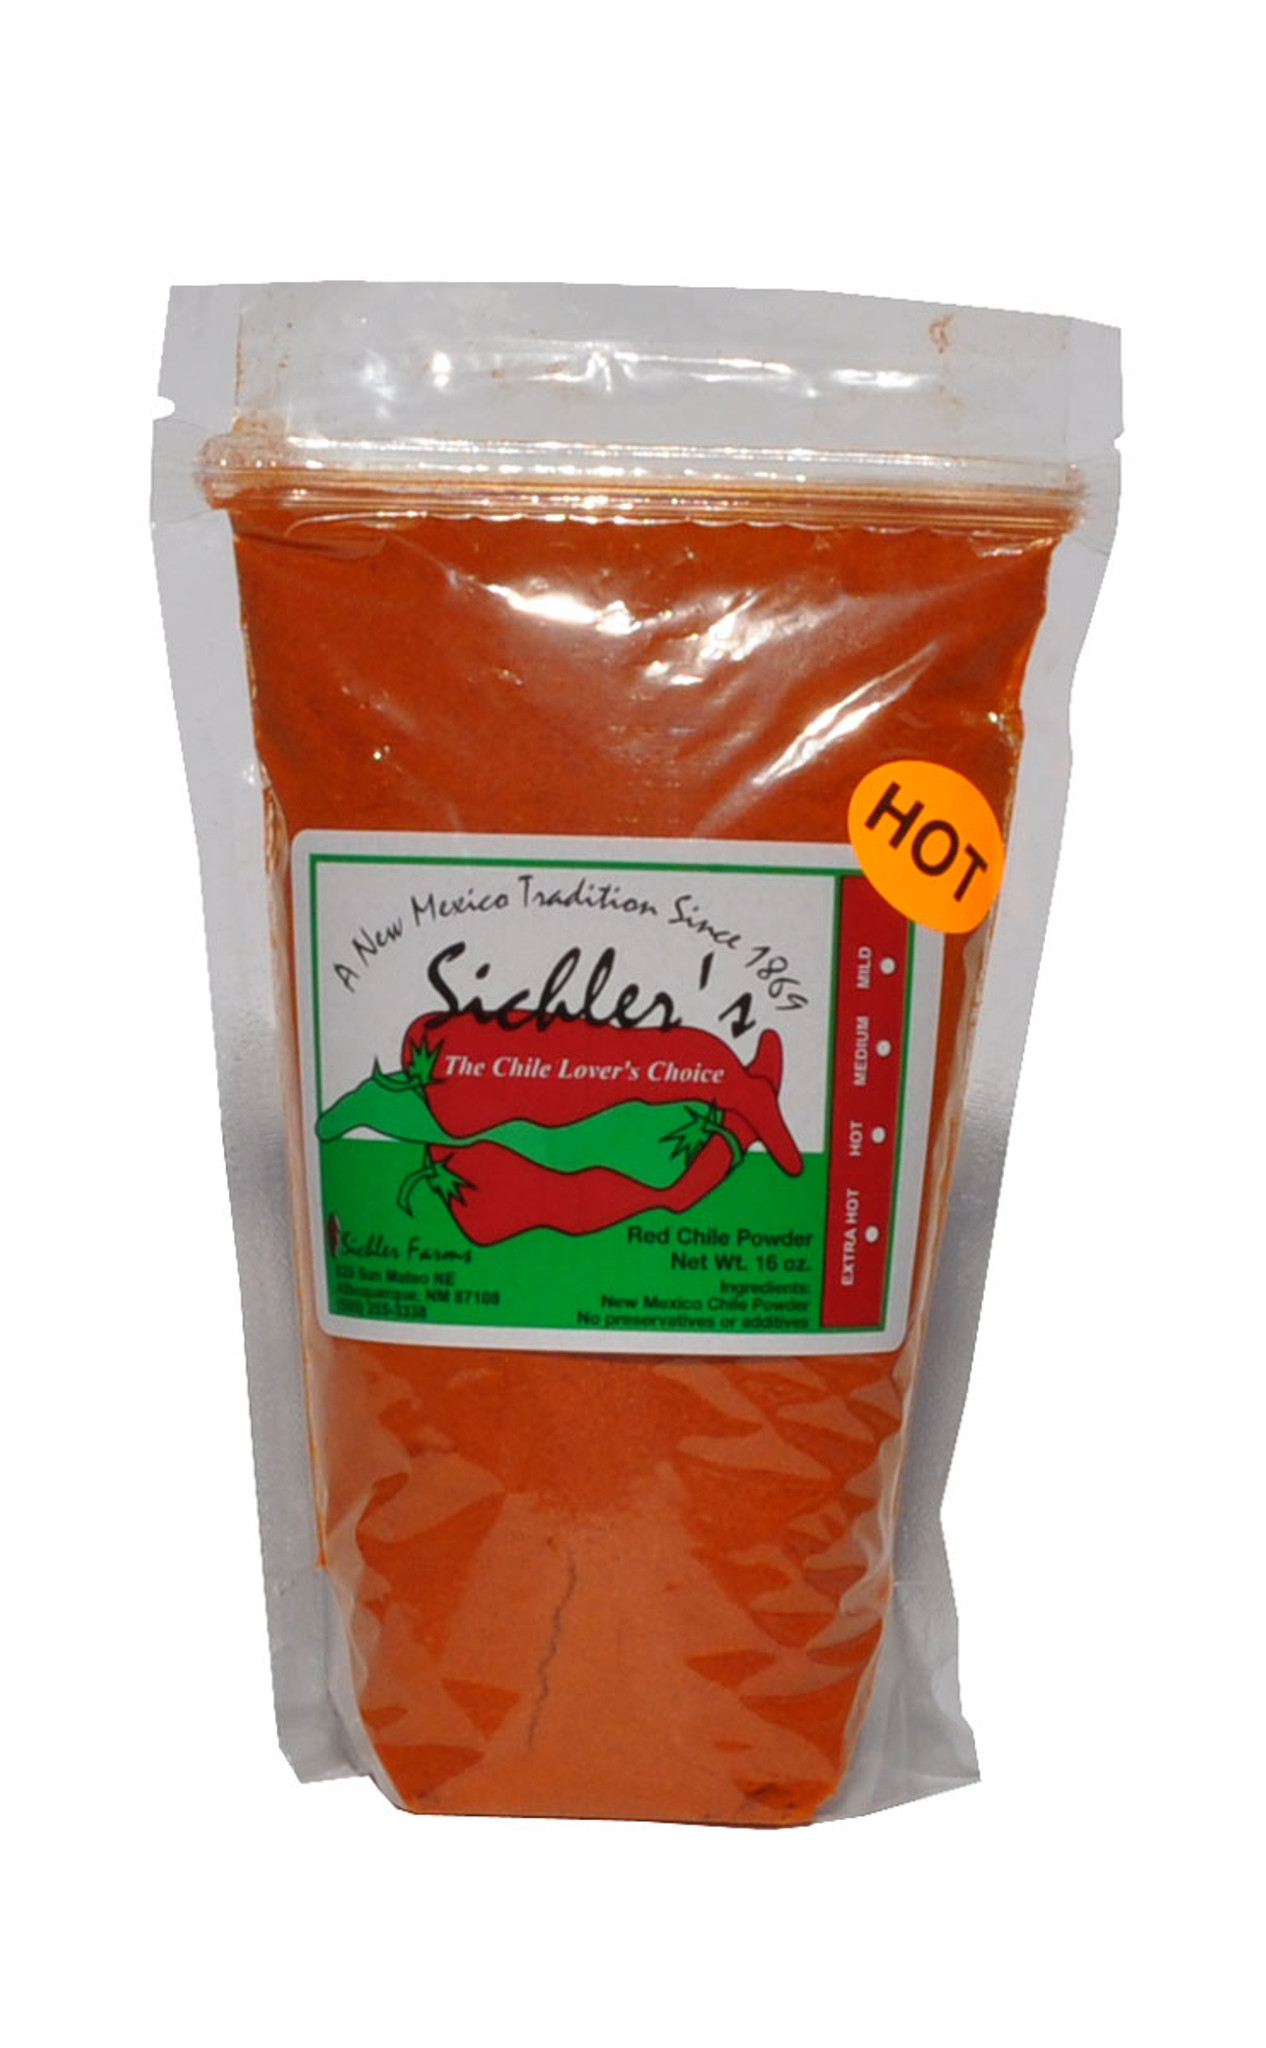 New Mexico Red Chile Powder - 1 Bag